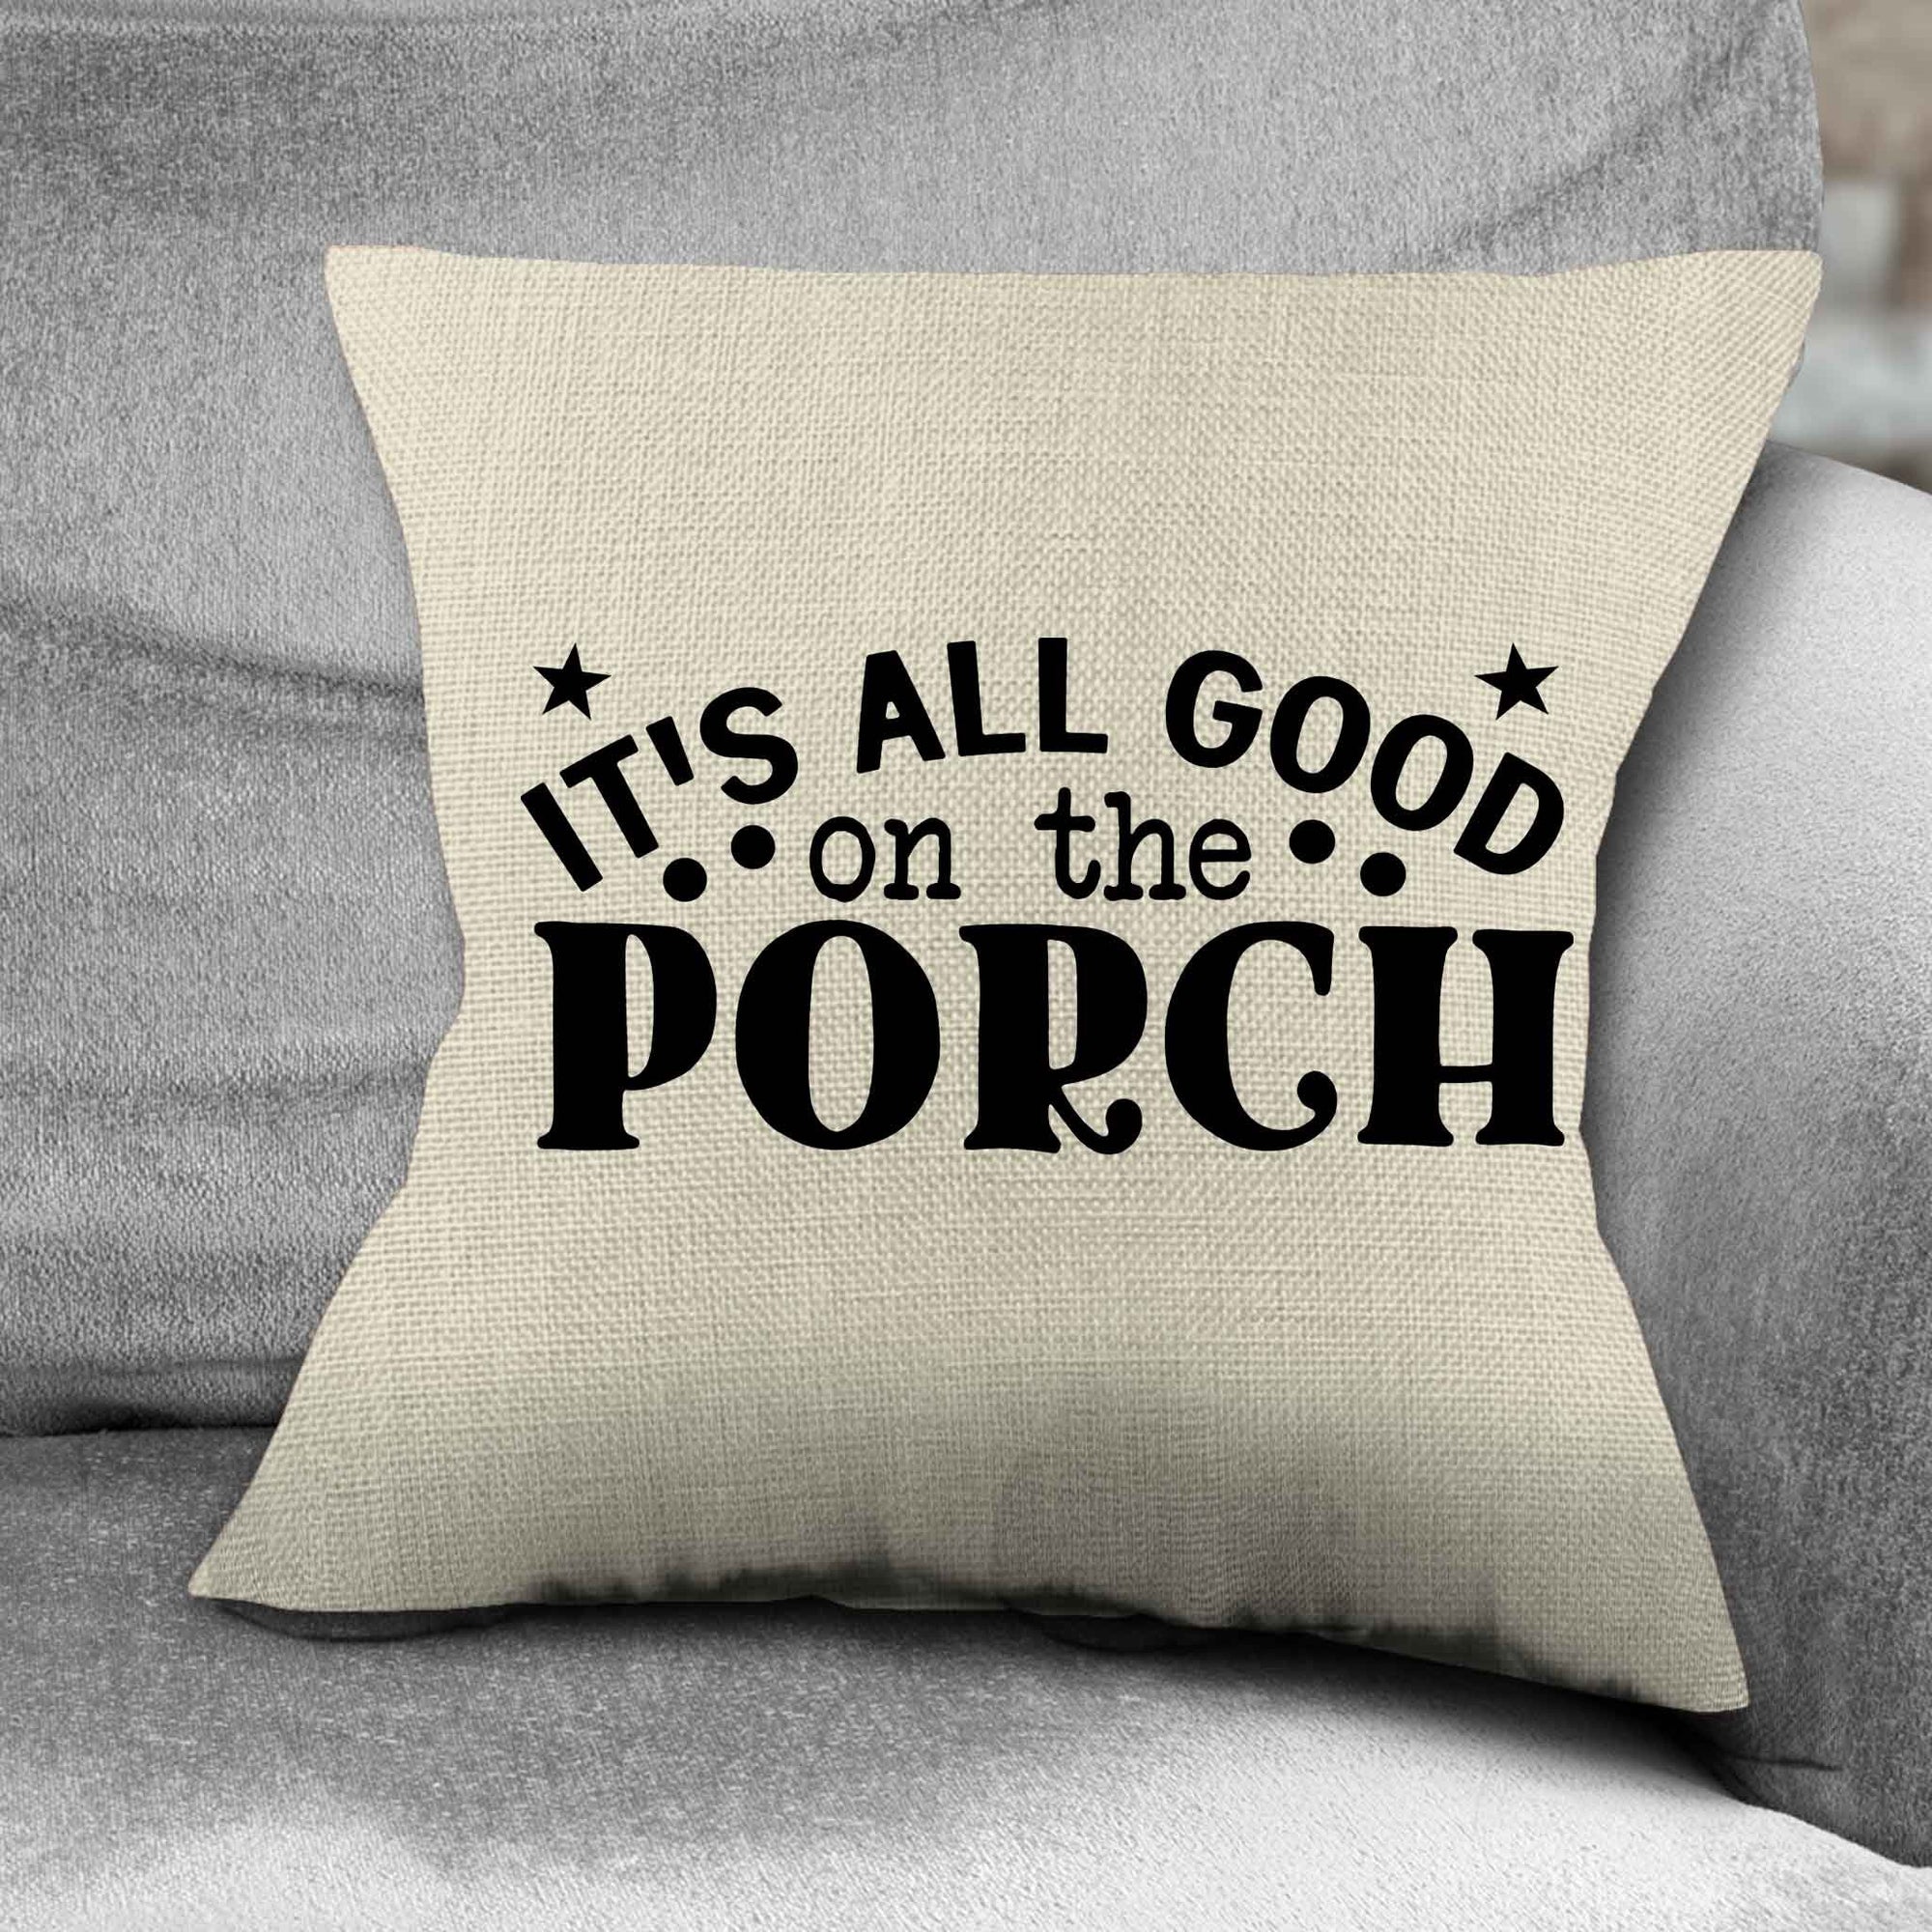 Personalized Throw Pillow | Custom Decorative Pillow | It's all good on the porch